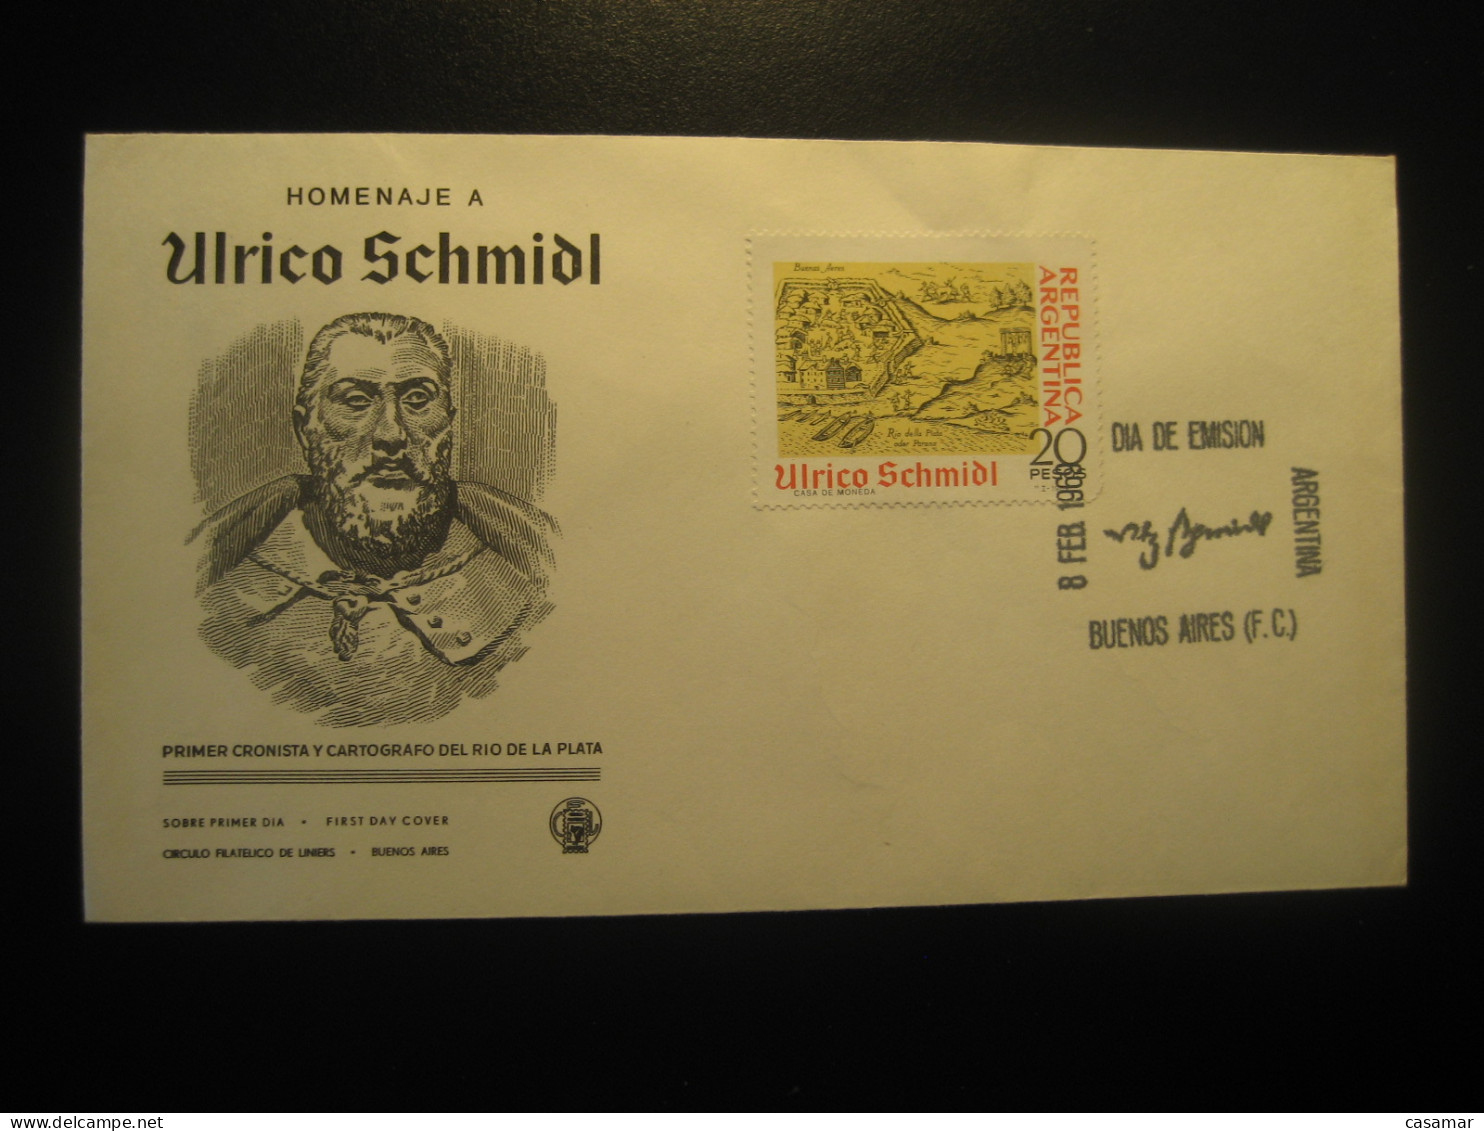 1969 Ulrico Schmidl Cartografo Cartography Cartographie Mapping Geography FDC Cancel Cover ARGENTINA Buenos Aires - Geographie